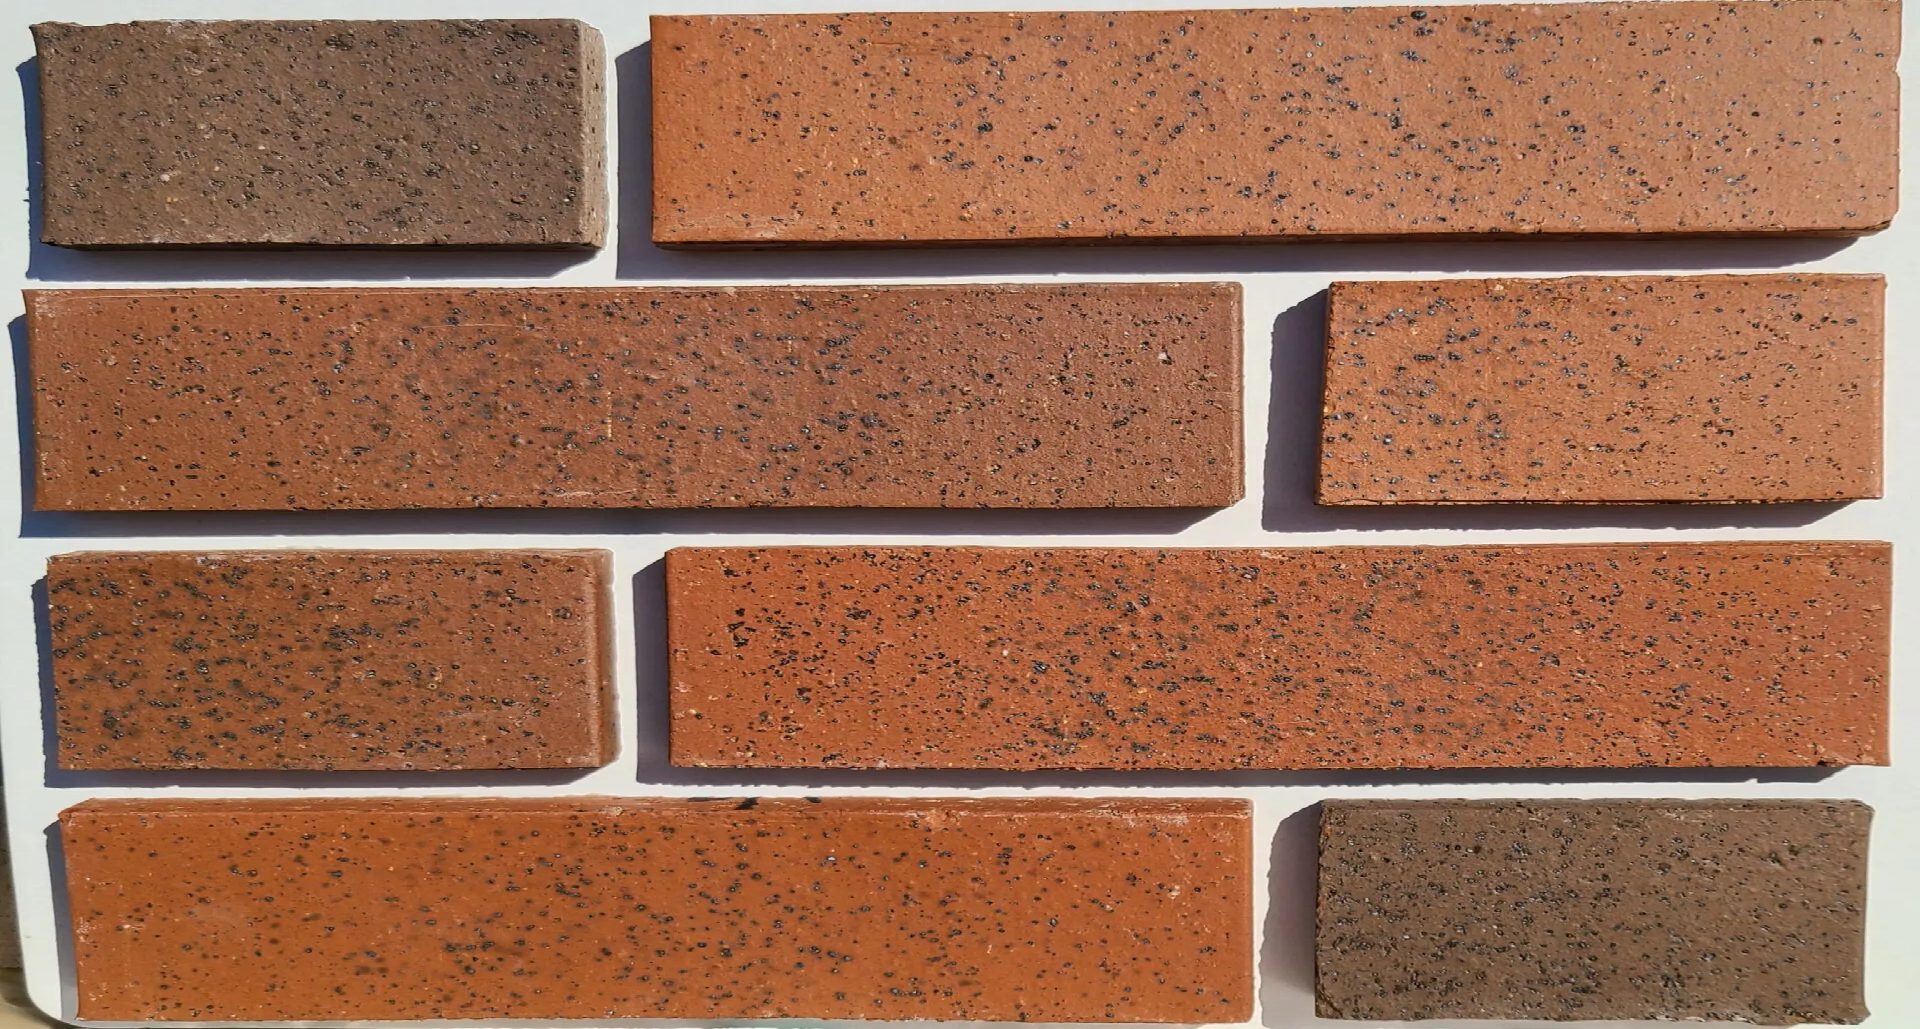 The view of a wall with various shade of red bricks